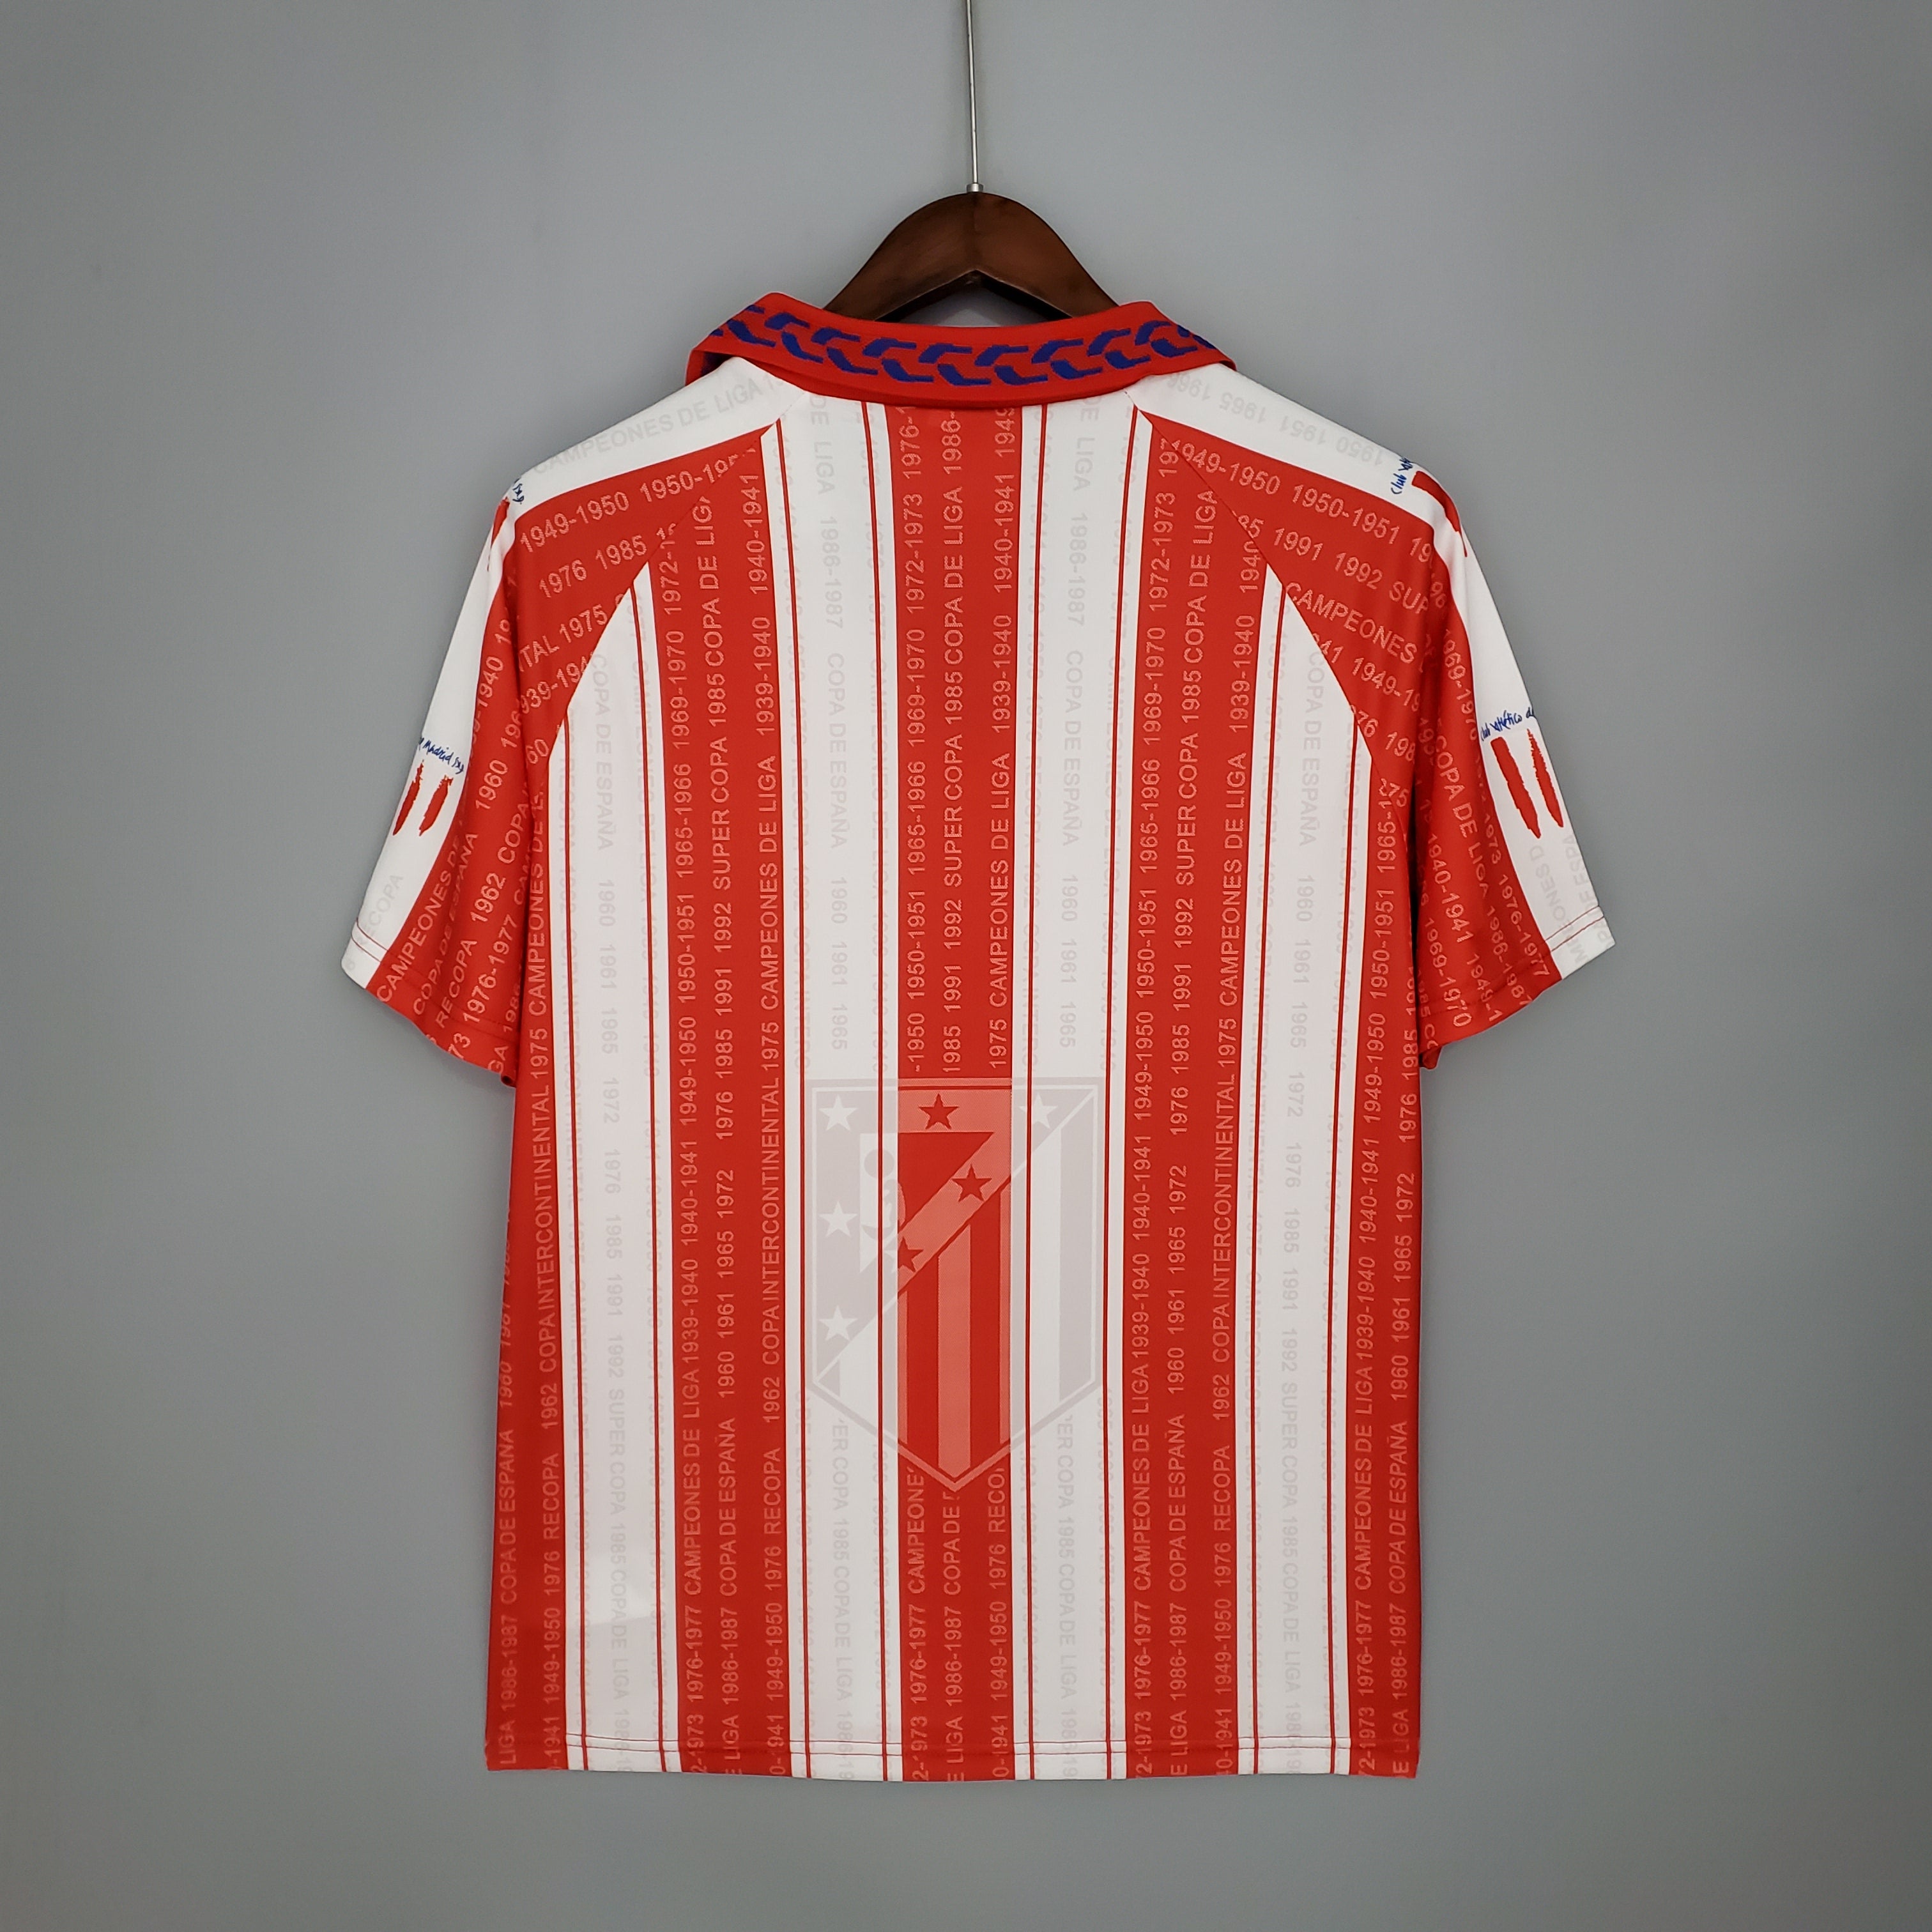 Atletico Madrid 1995-96 Home Jersey